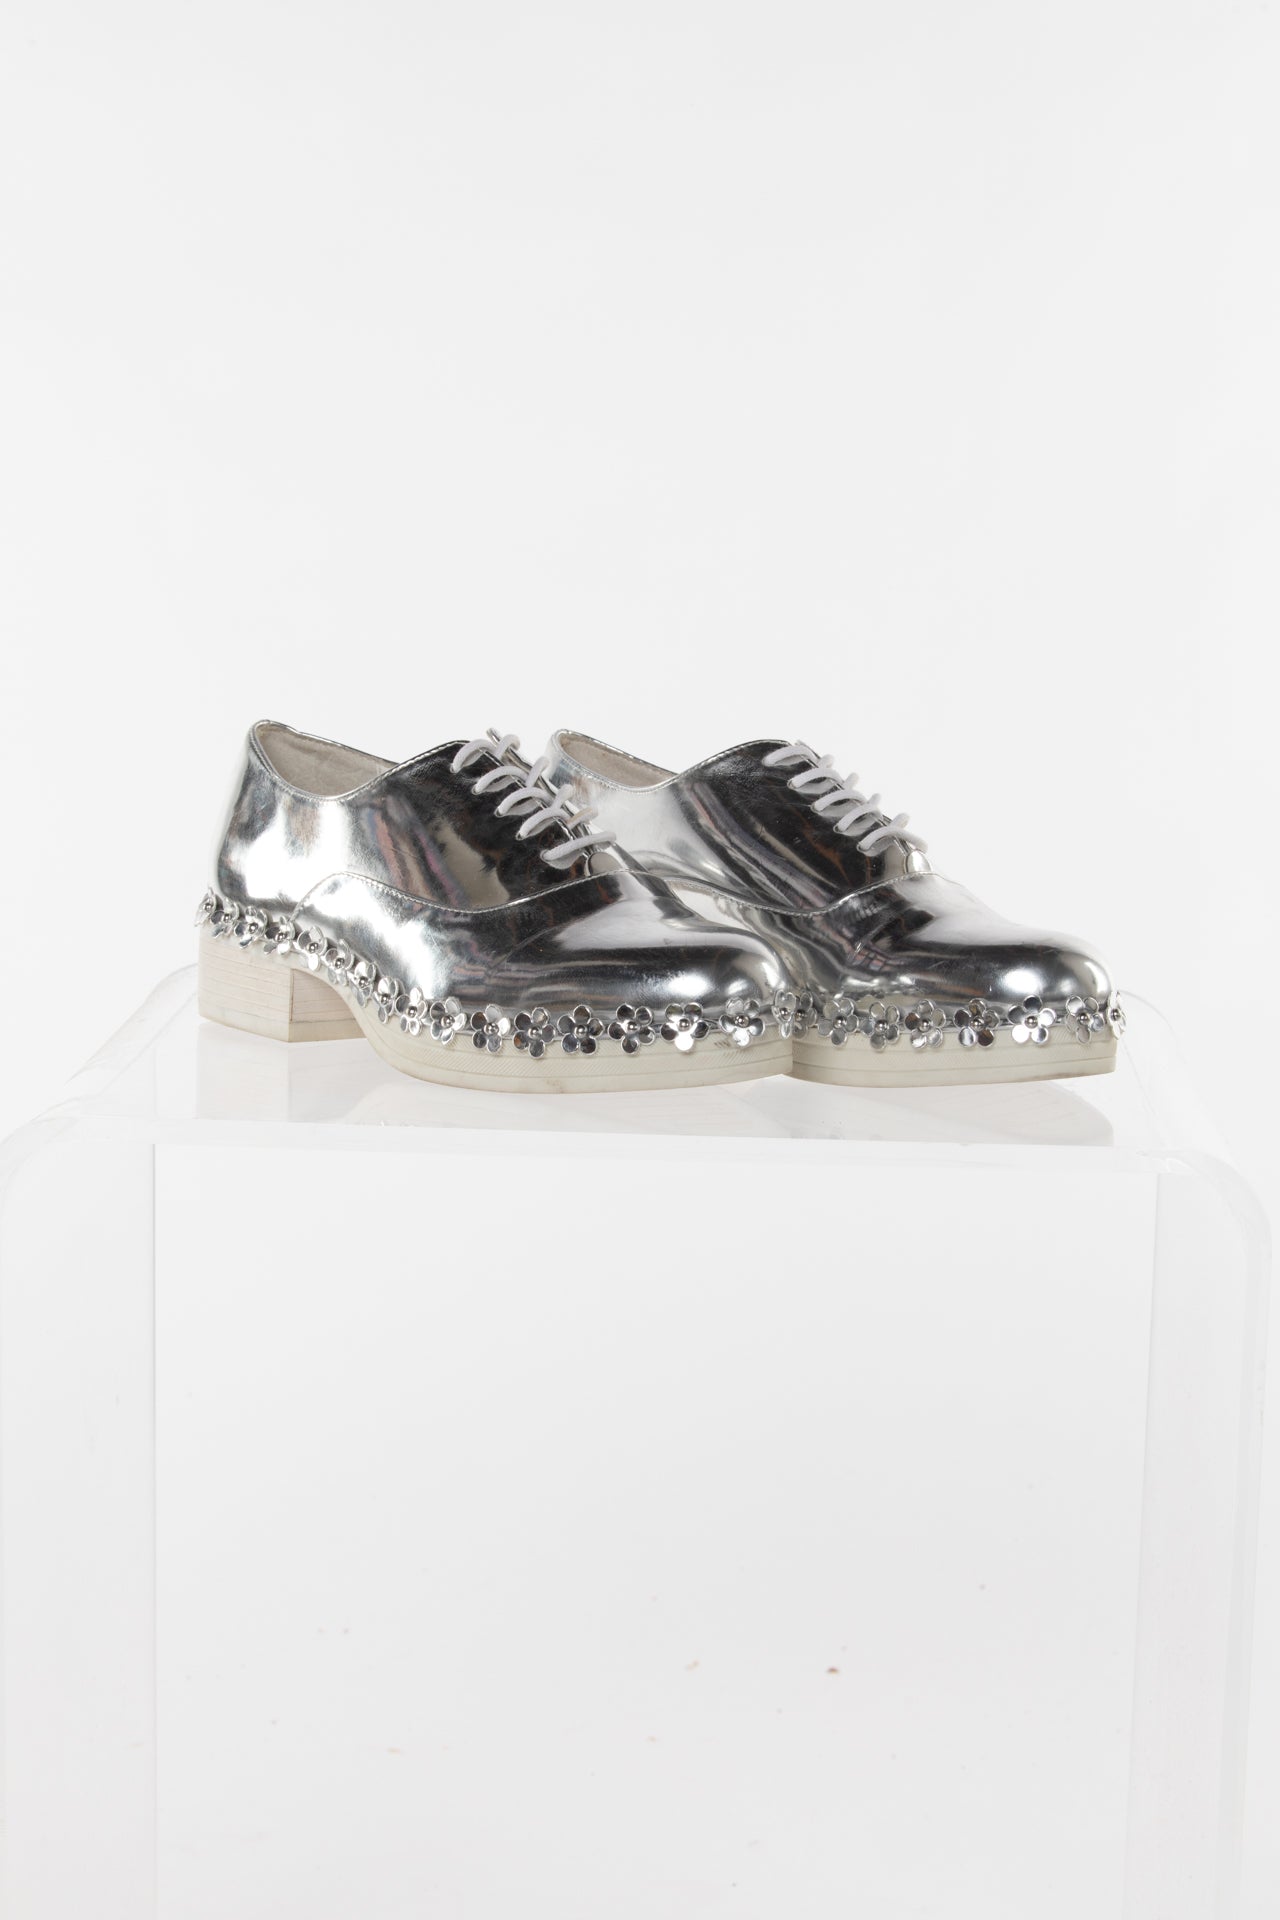 VINTAGE SILVER DAISY LOAFERS